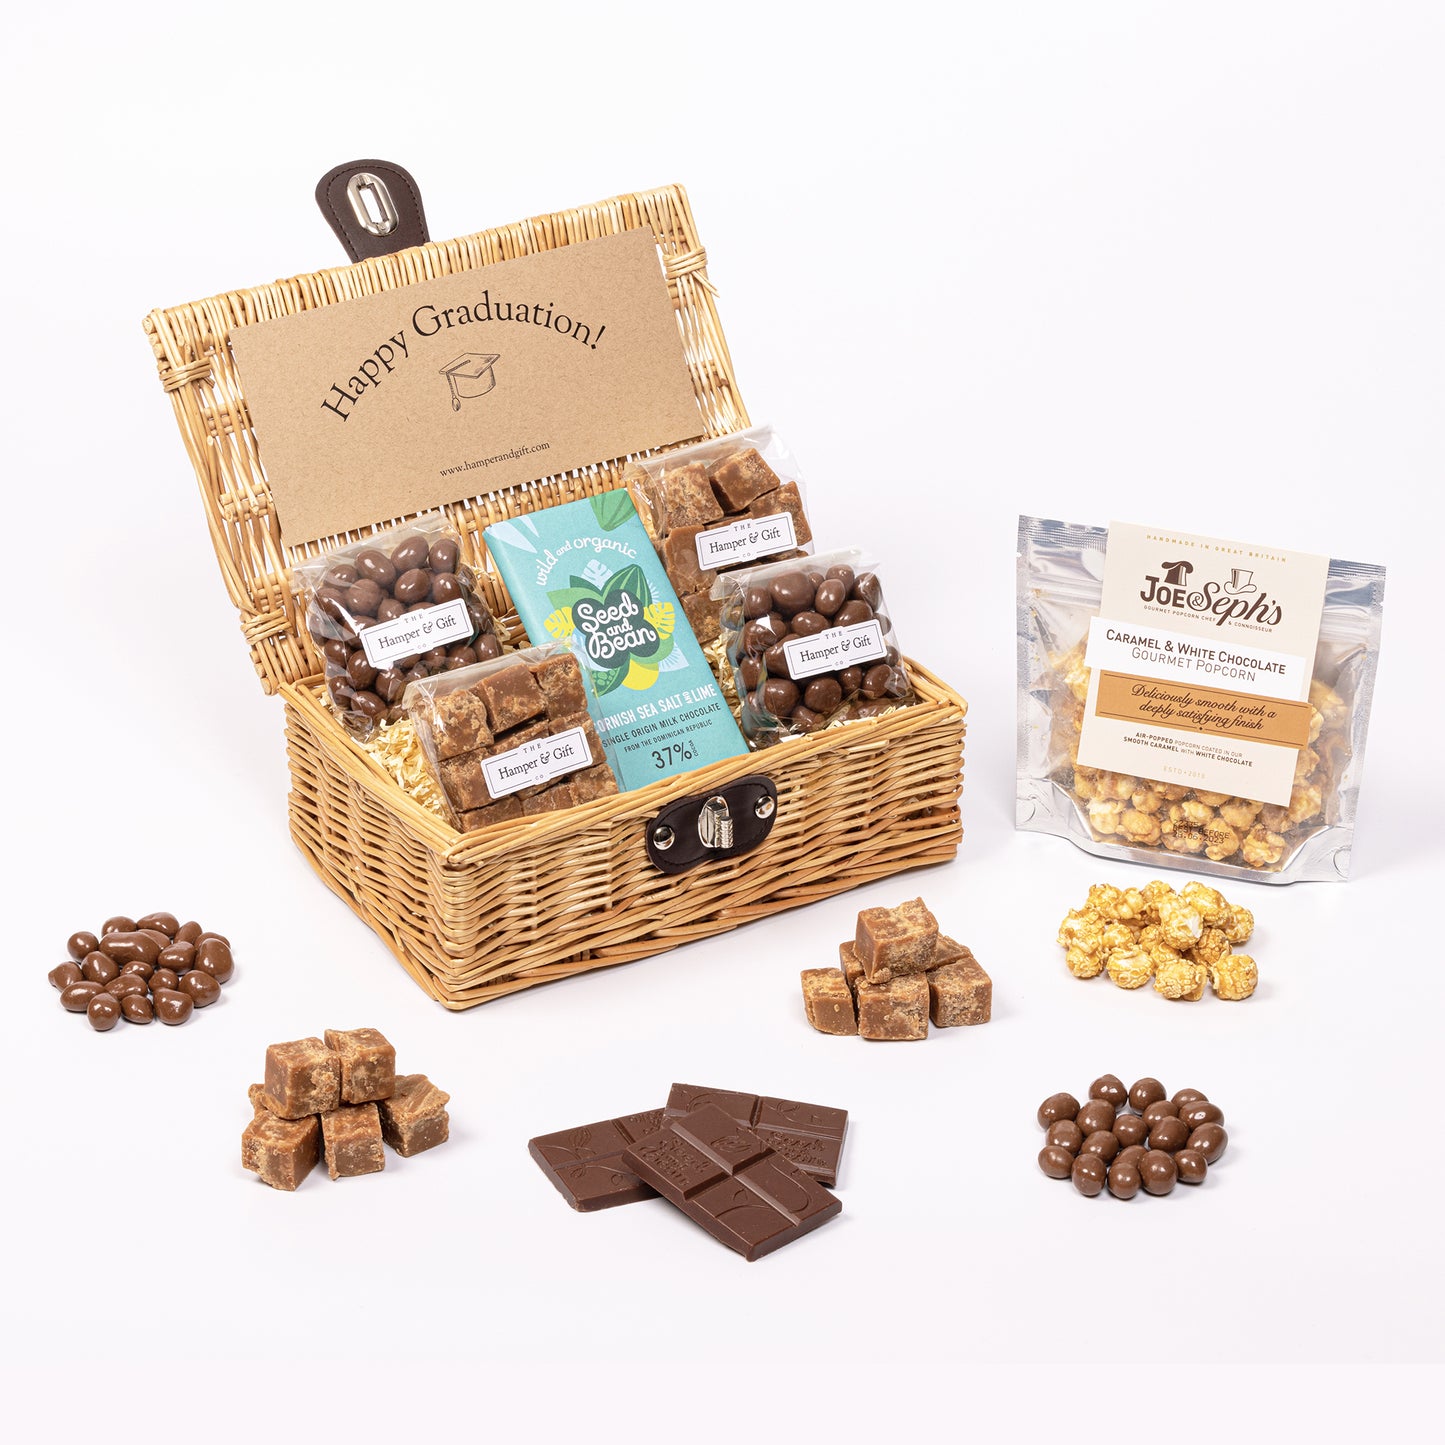 Little Graduation Hamper filled with chocolate, fudge and gourmet popcorn